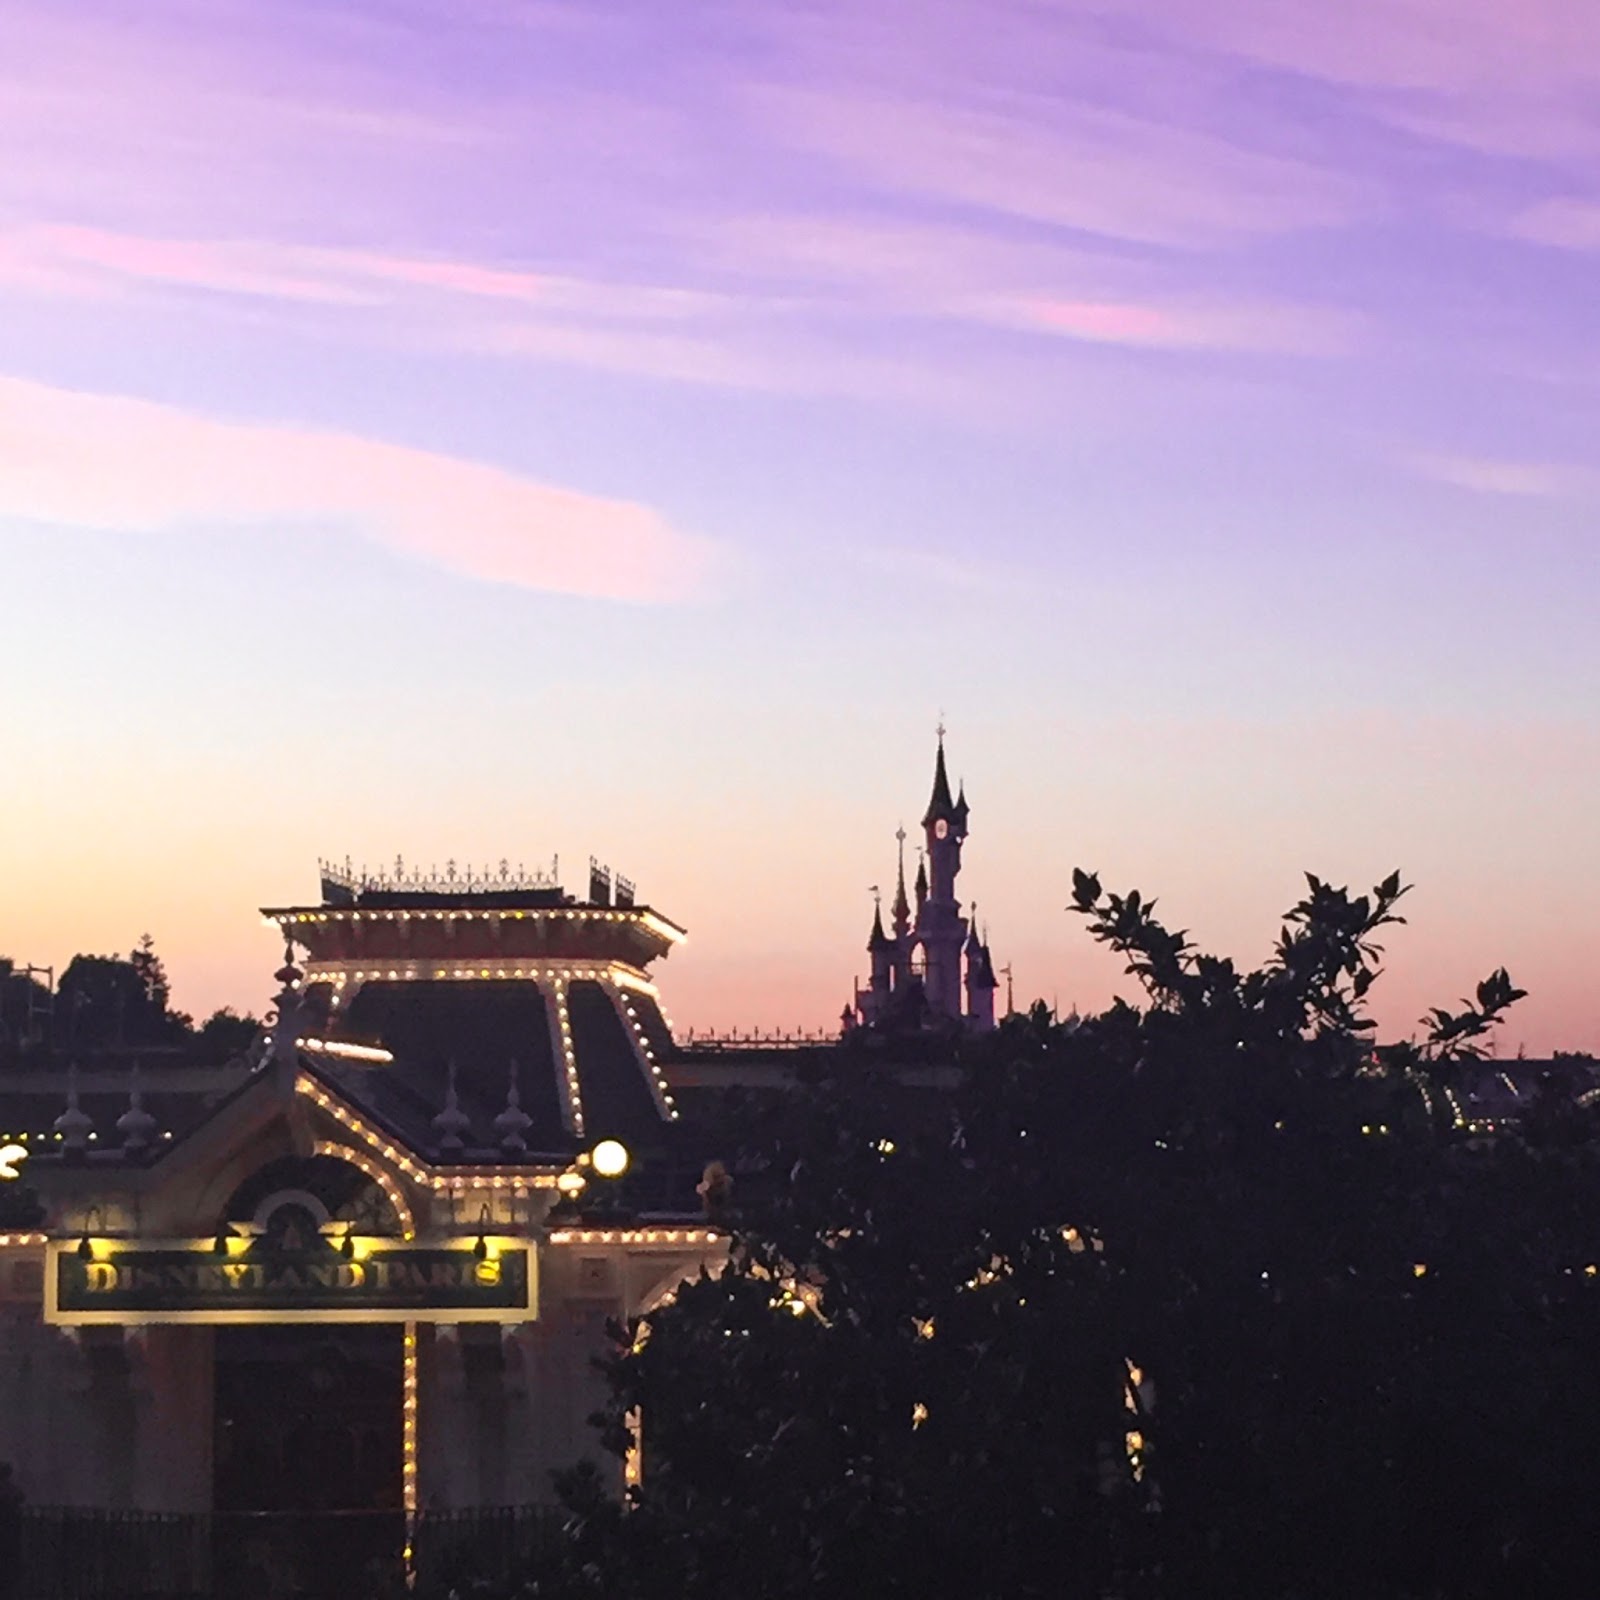 The Most Instagrammable Places At Disneyland Paris, Disneyland Paris, Travel, Disneyland Paris Photos, disneyland paris photo ideas, disneyland hotel